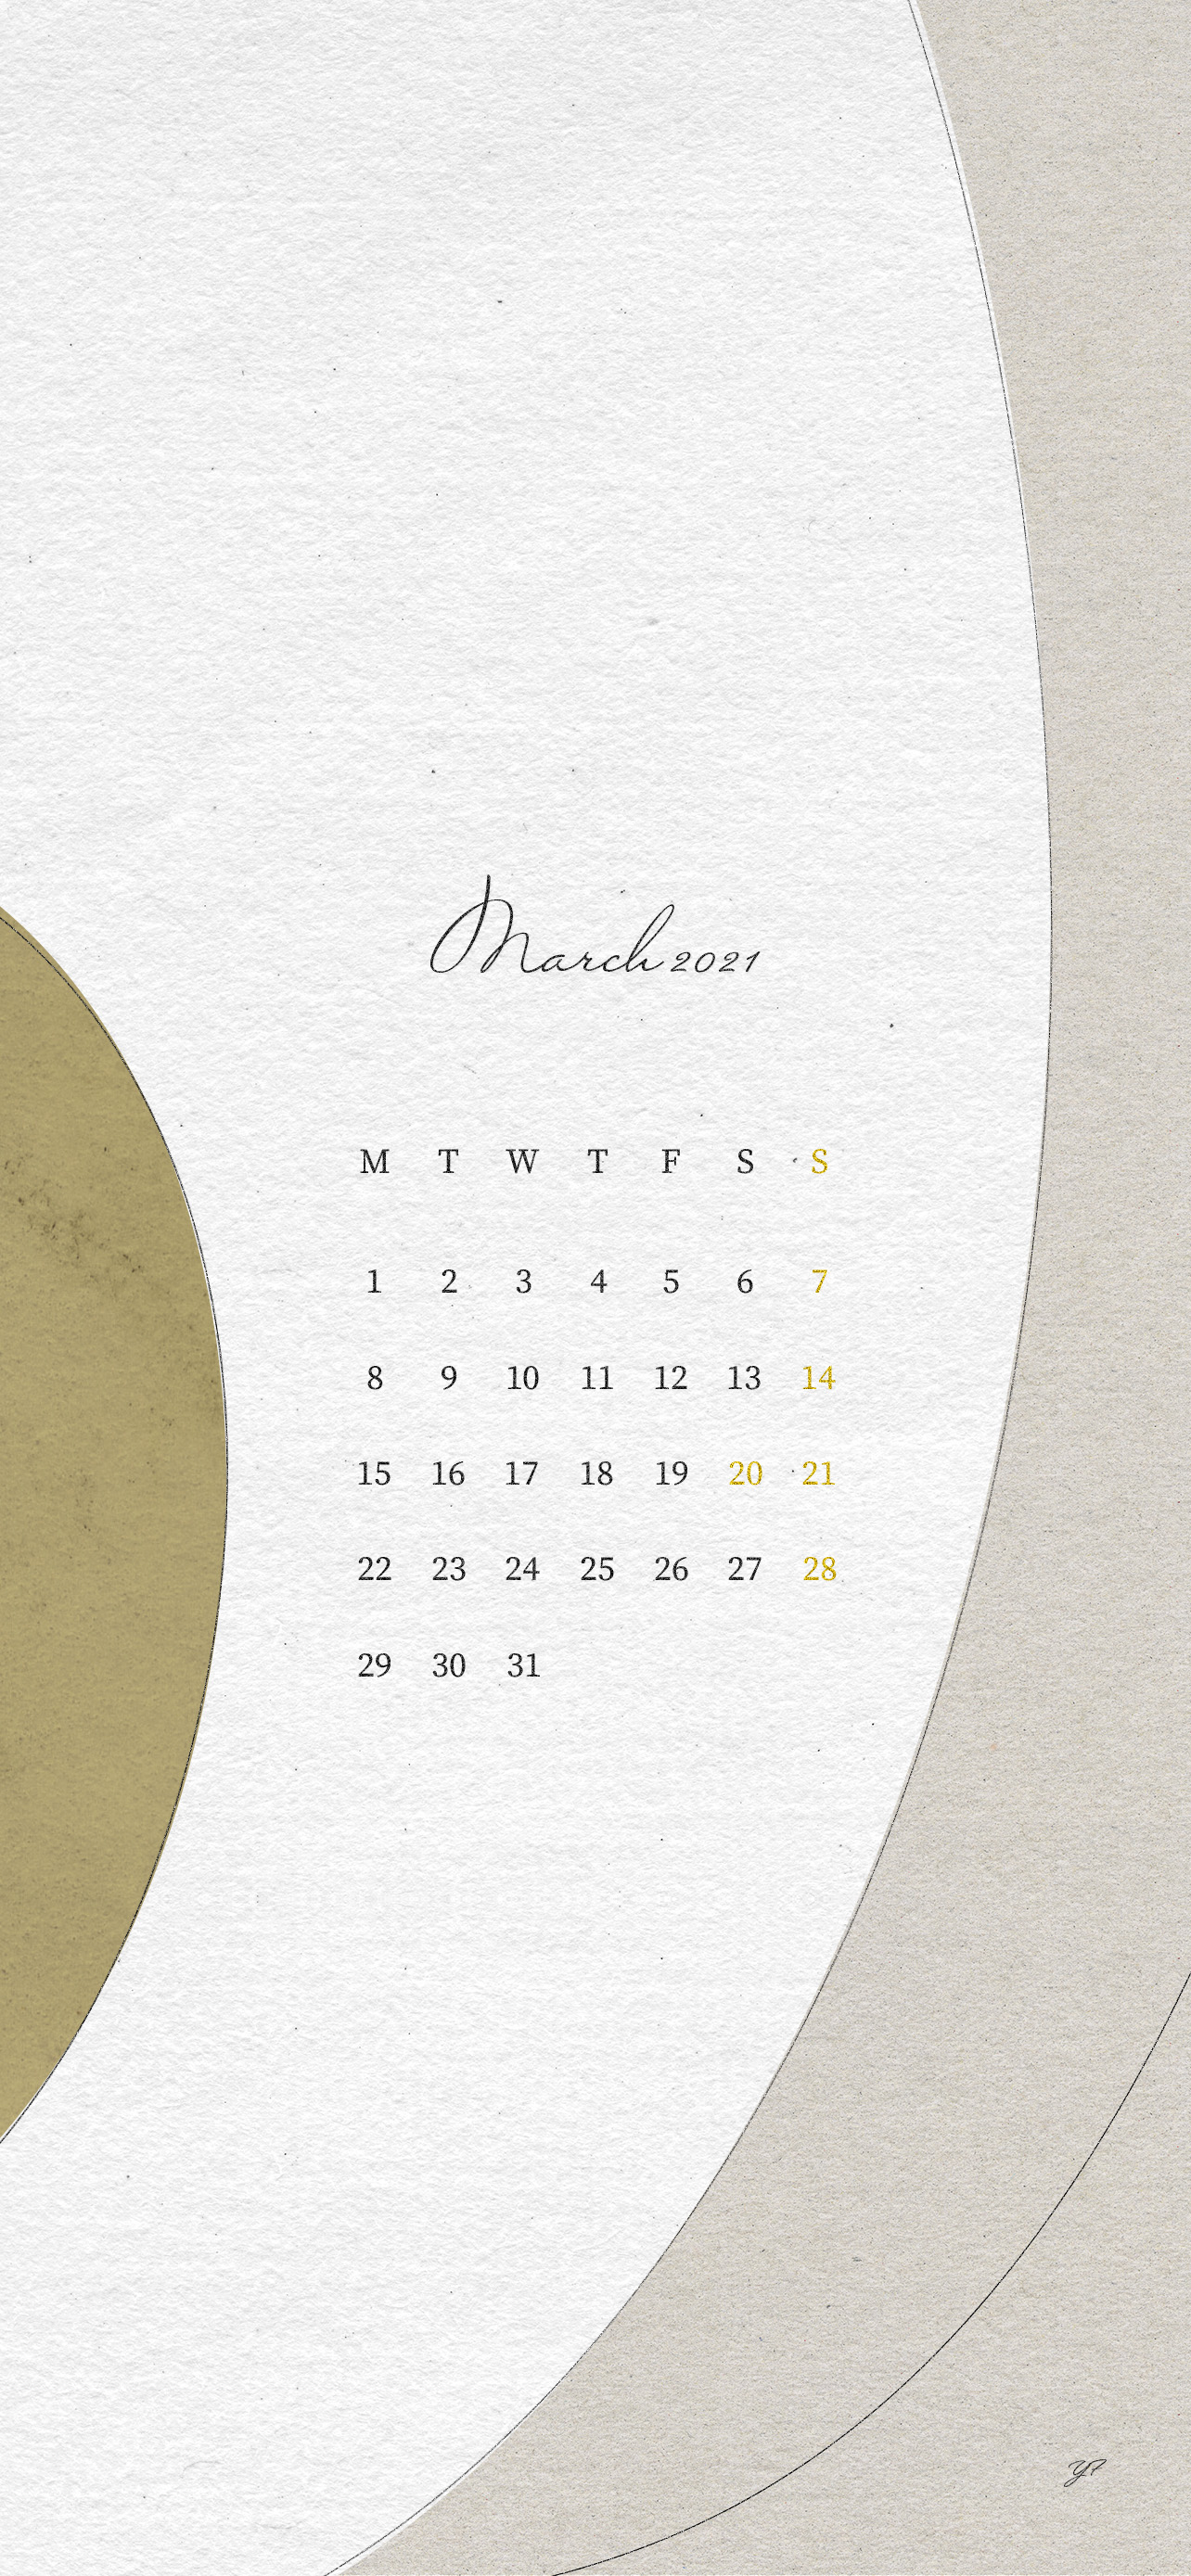 March 21 Calendar Wallpaper For The Iphone Designed By Yf